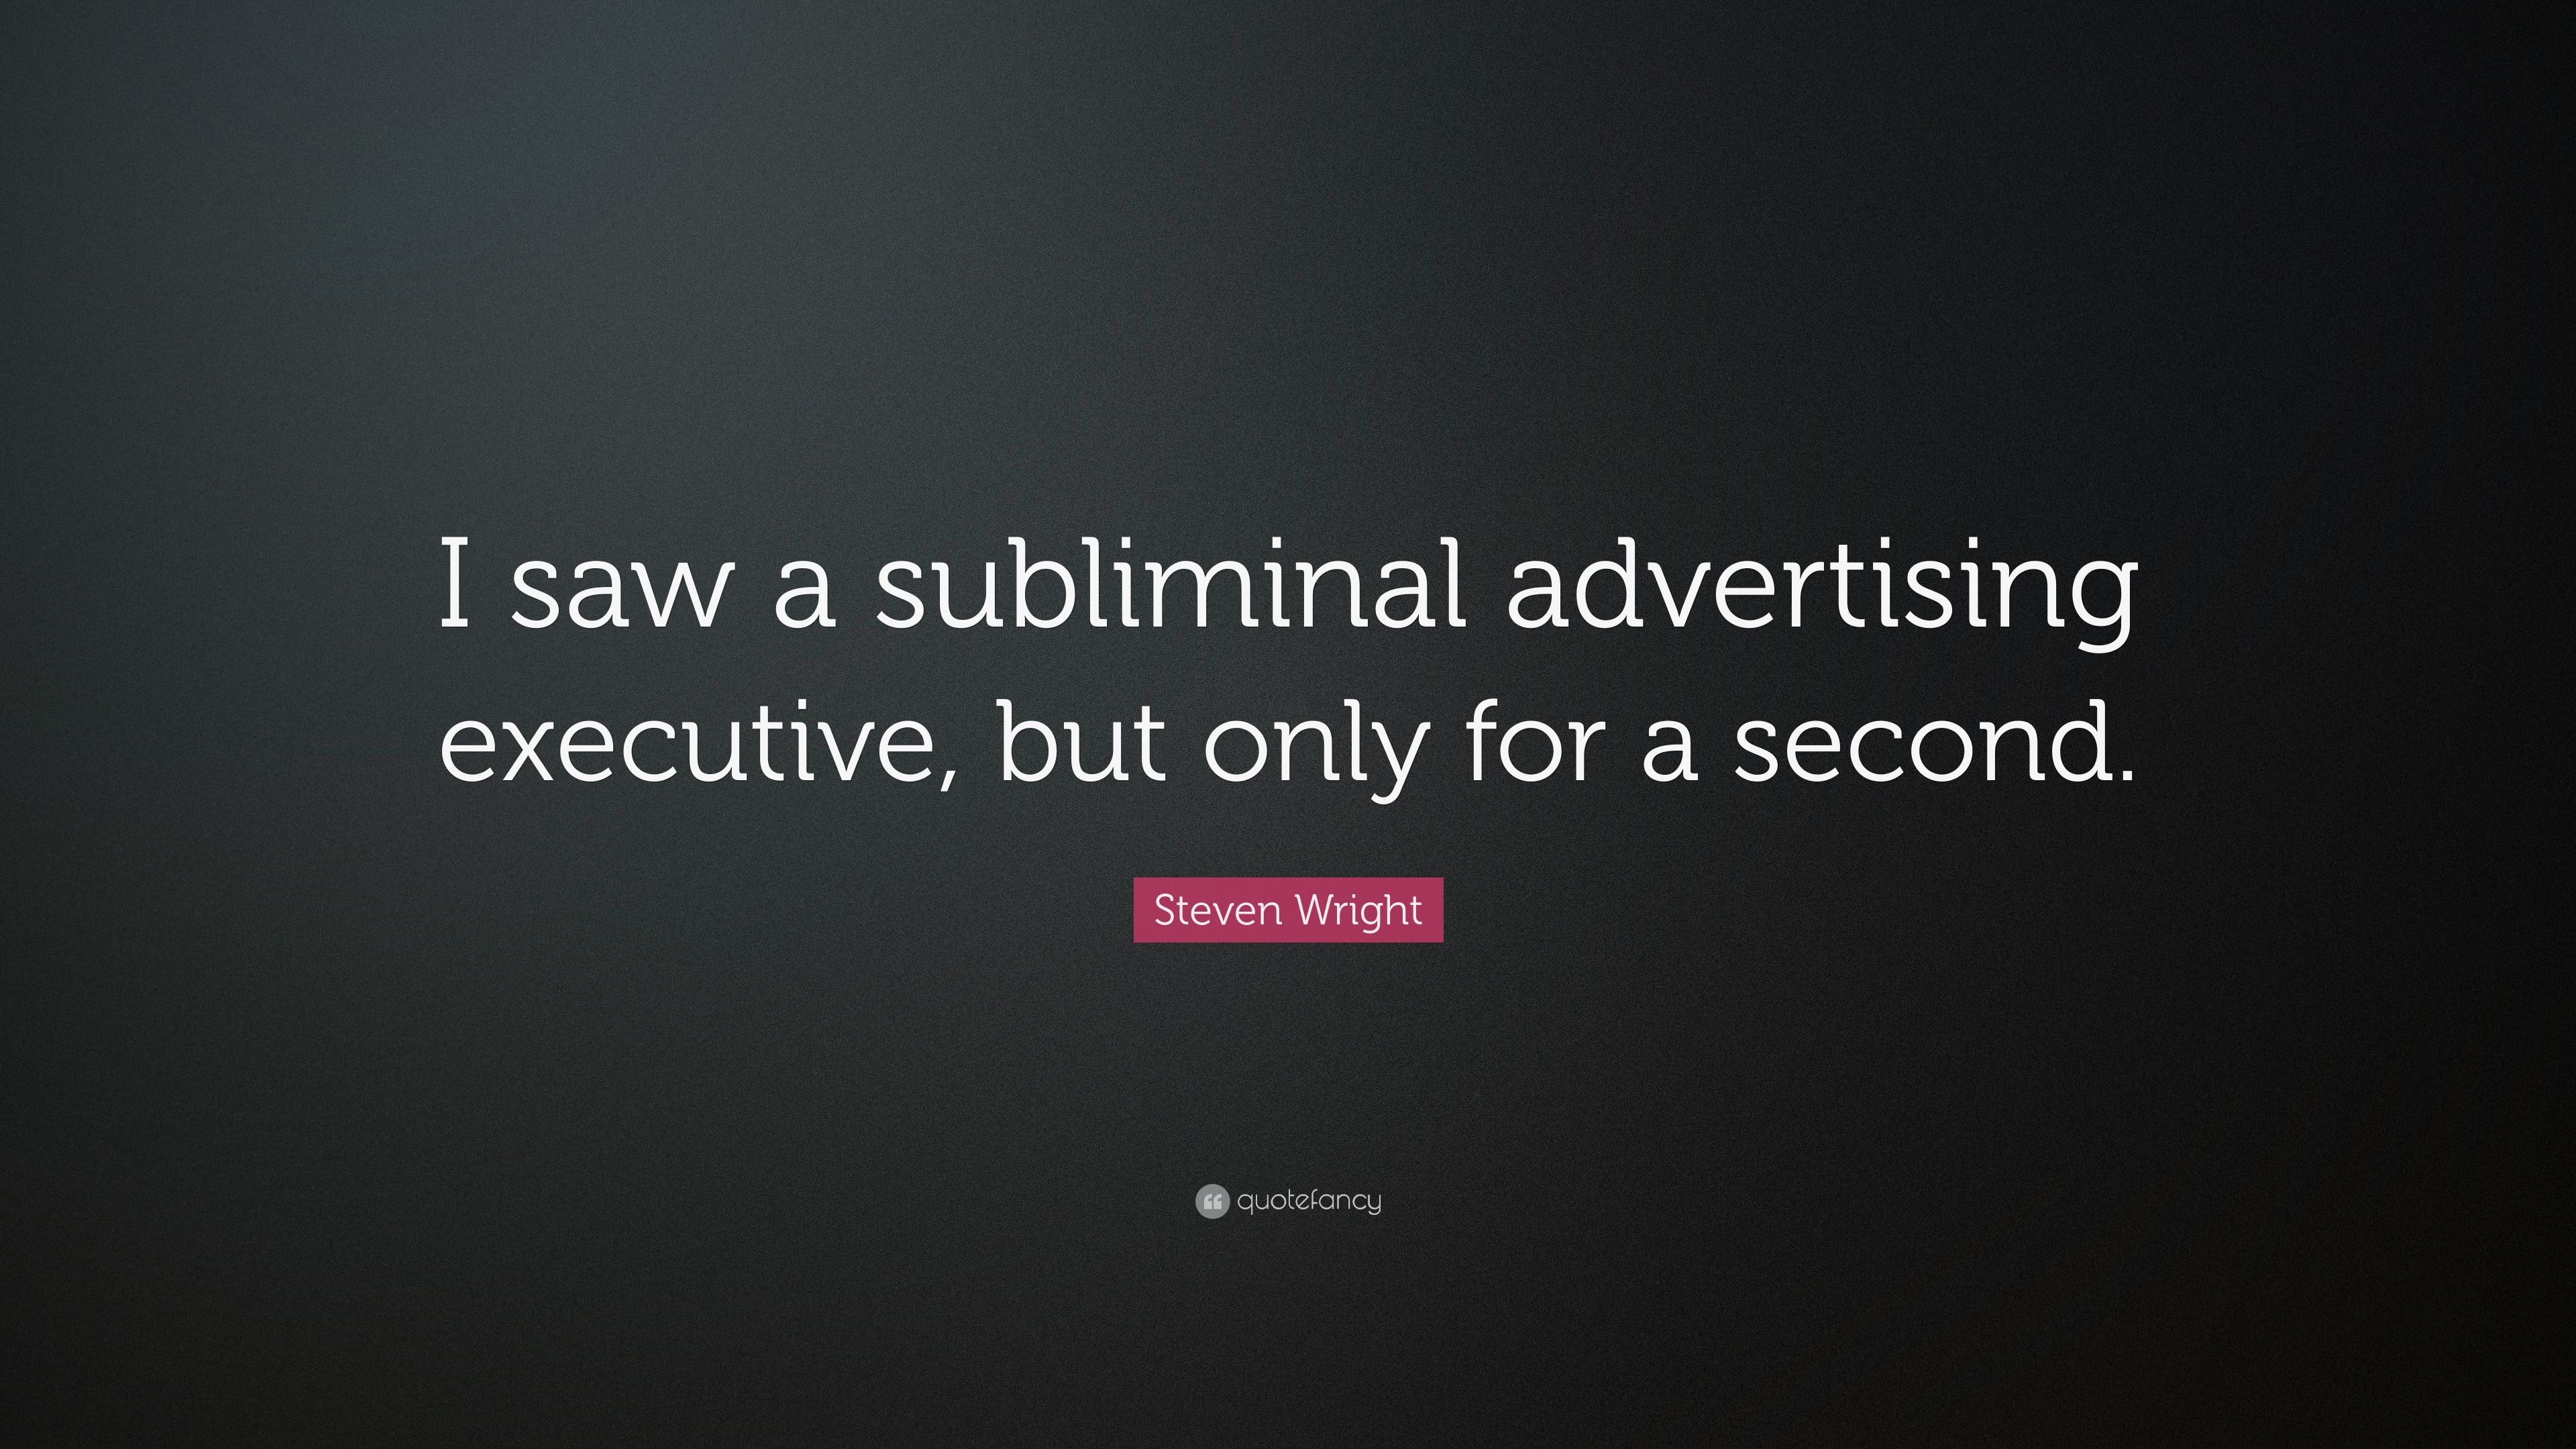 Steven Wright Quote: “I saw a subliminal advertising executive, but